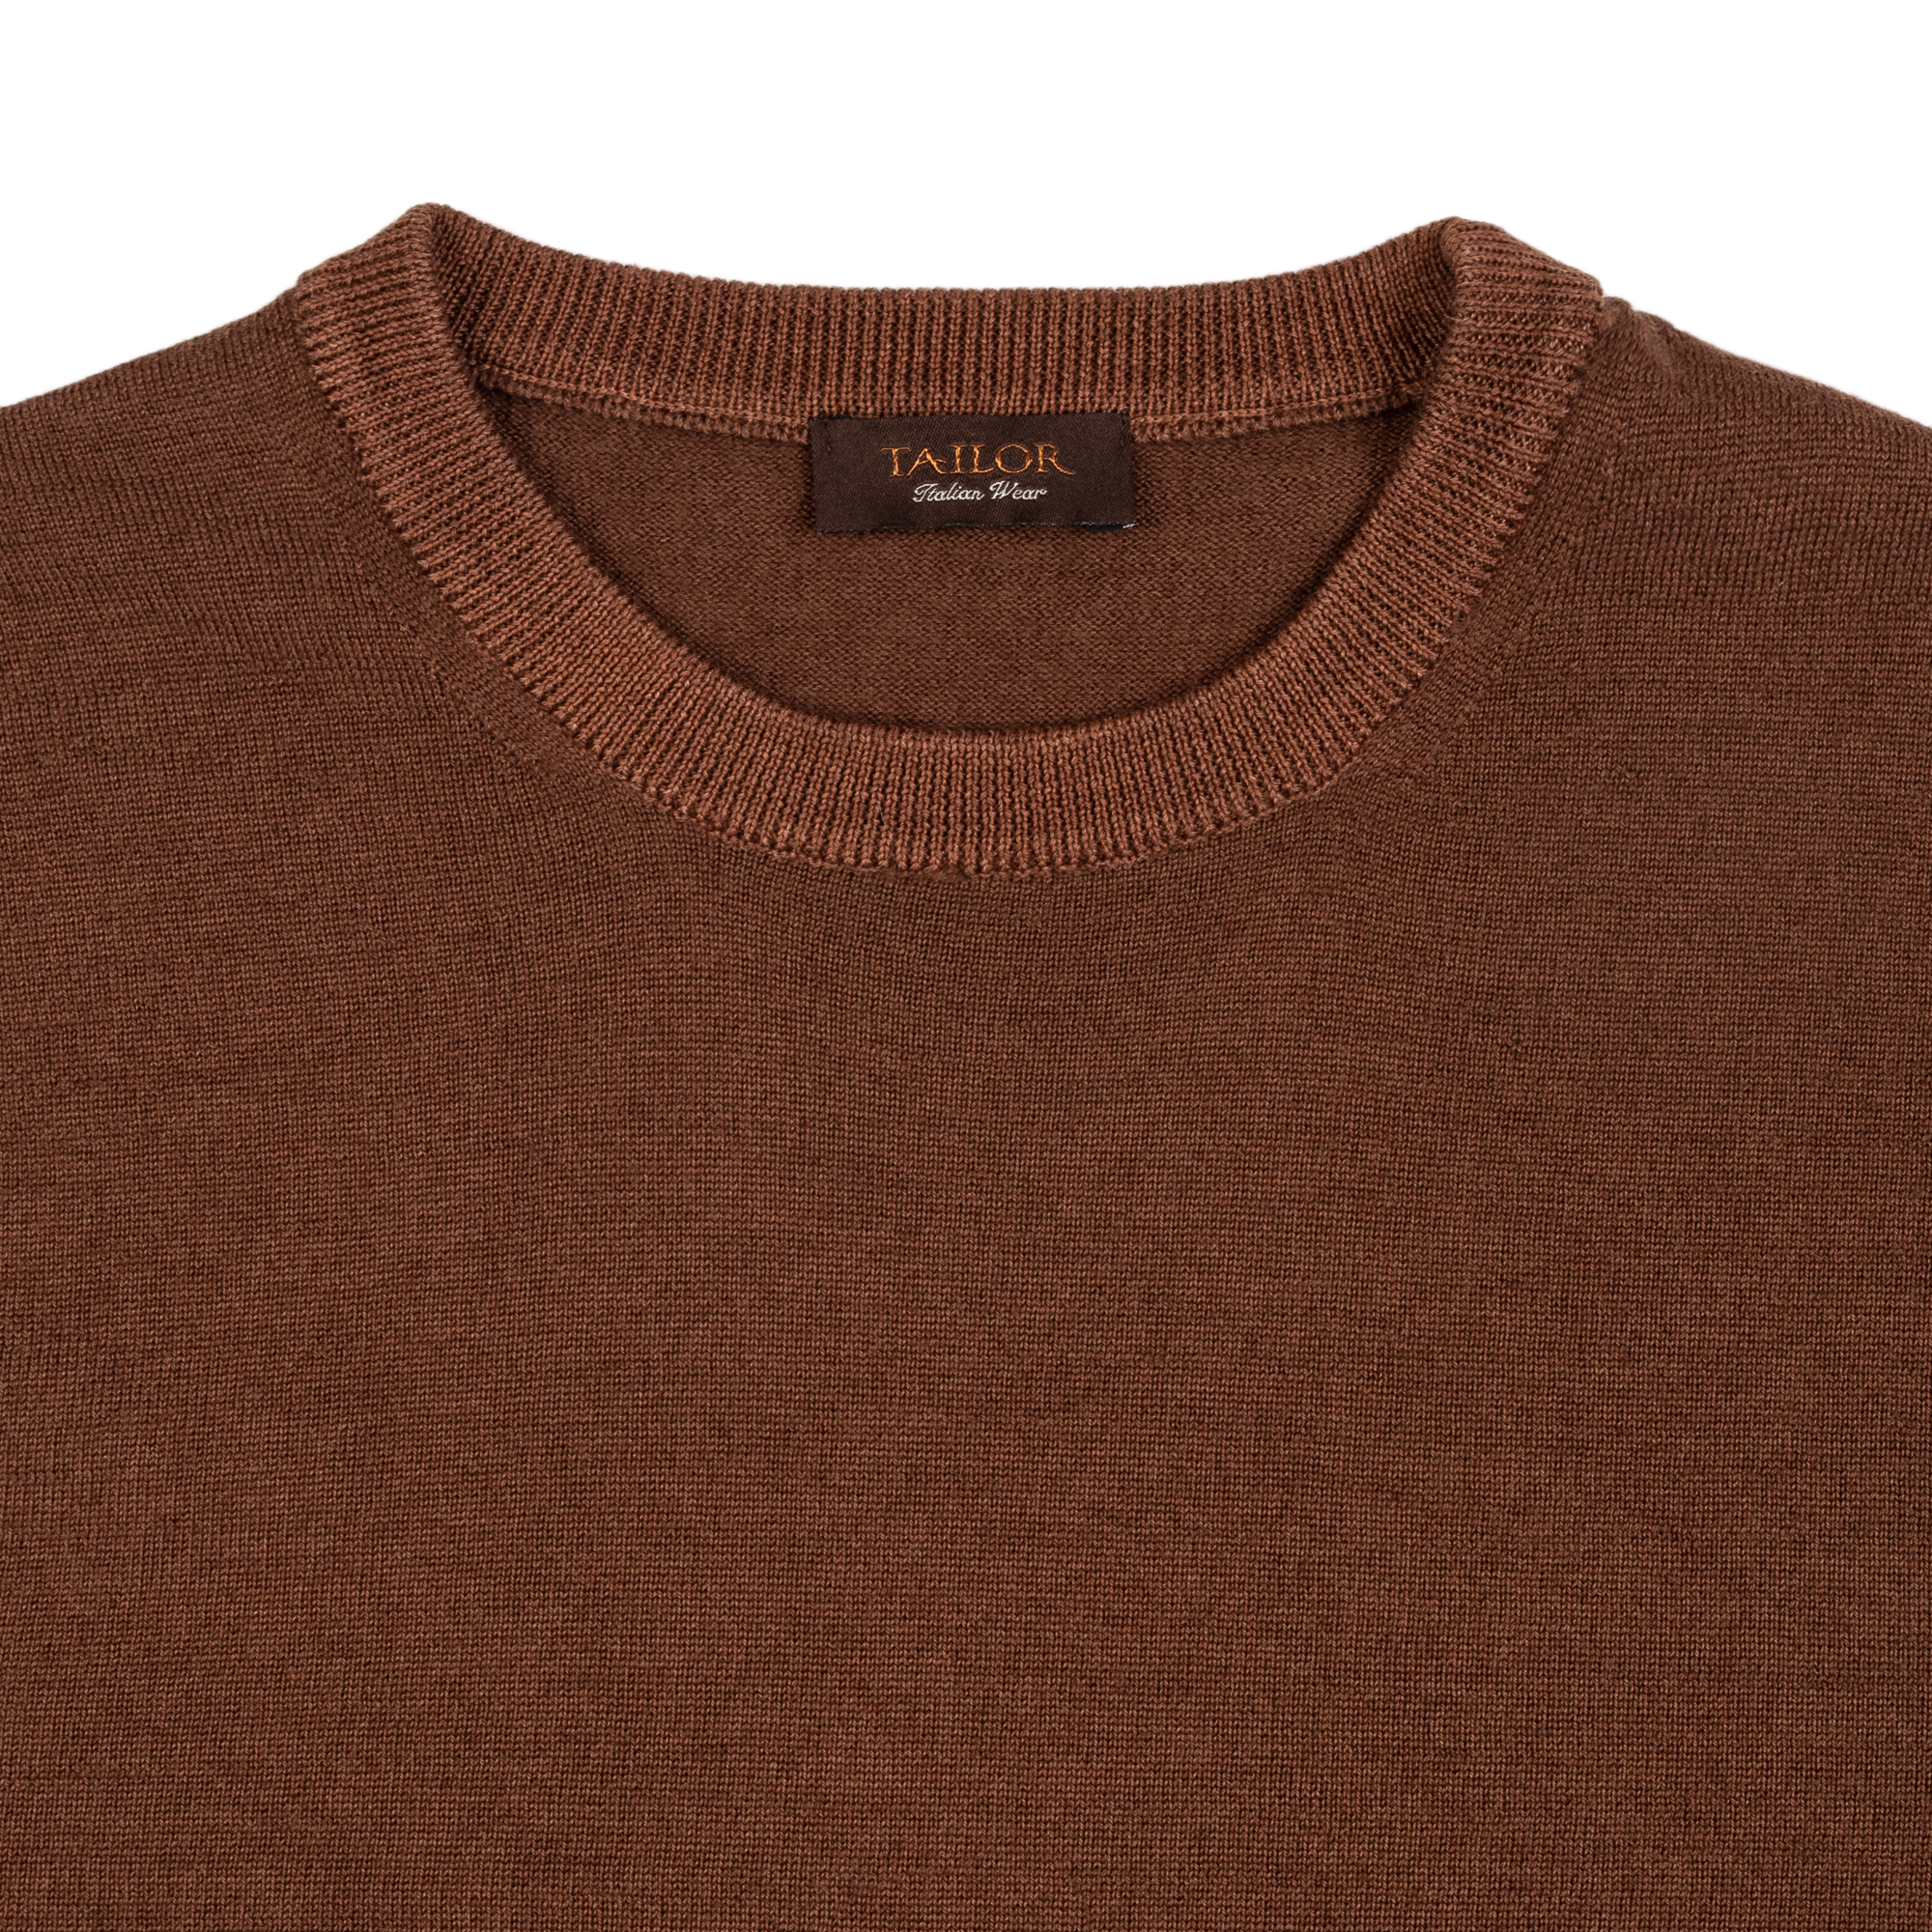 Men's Brown Knitted Crewneck Sweater